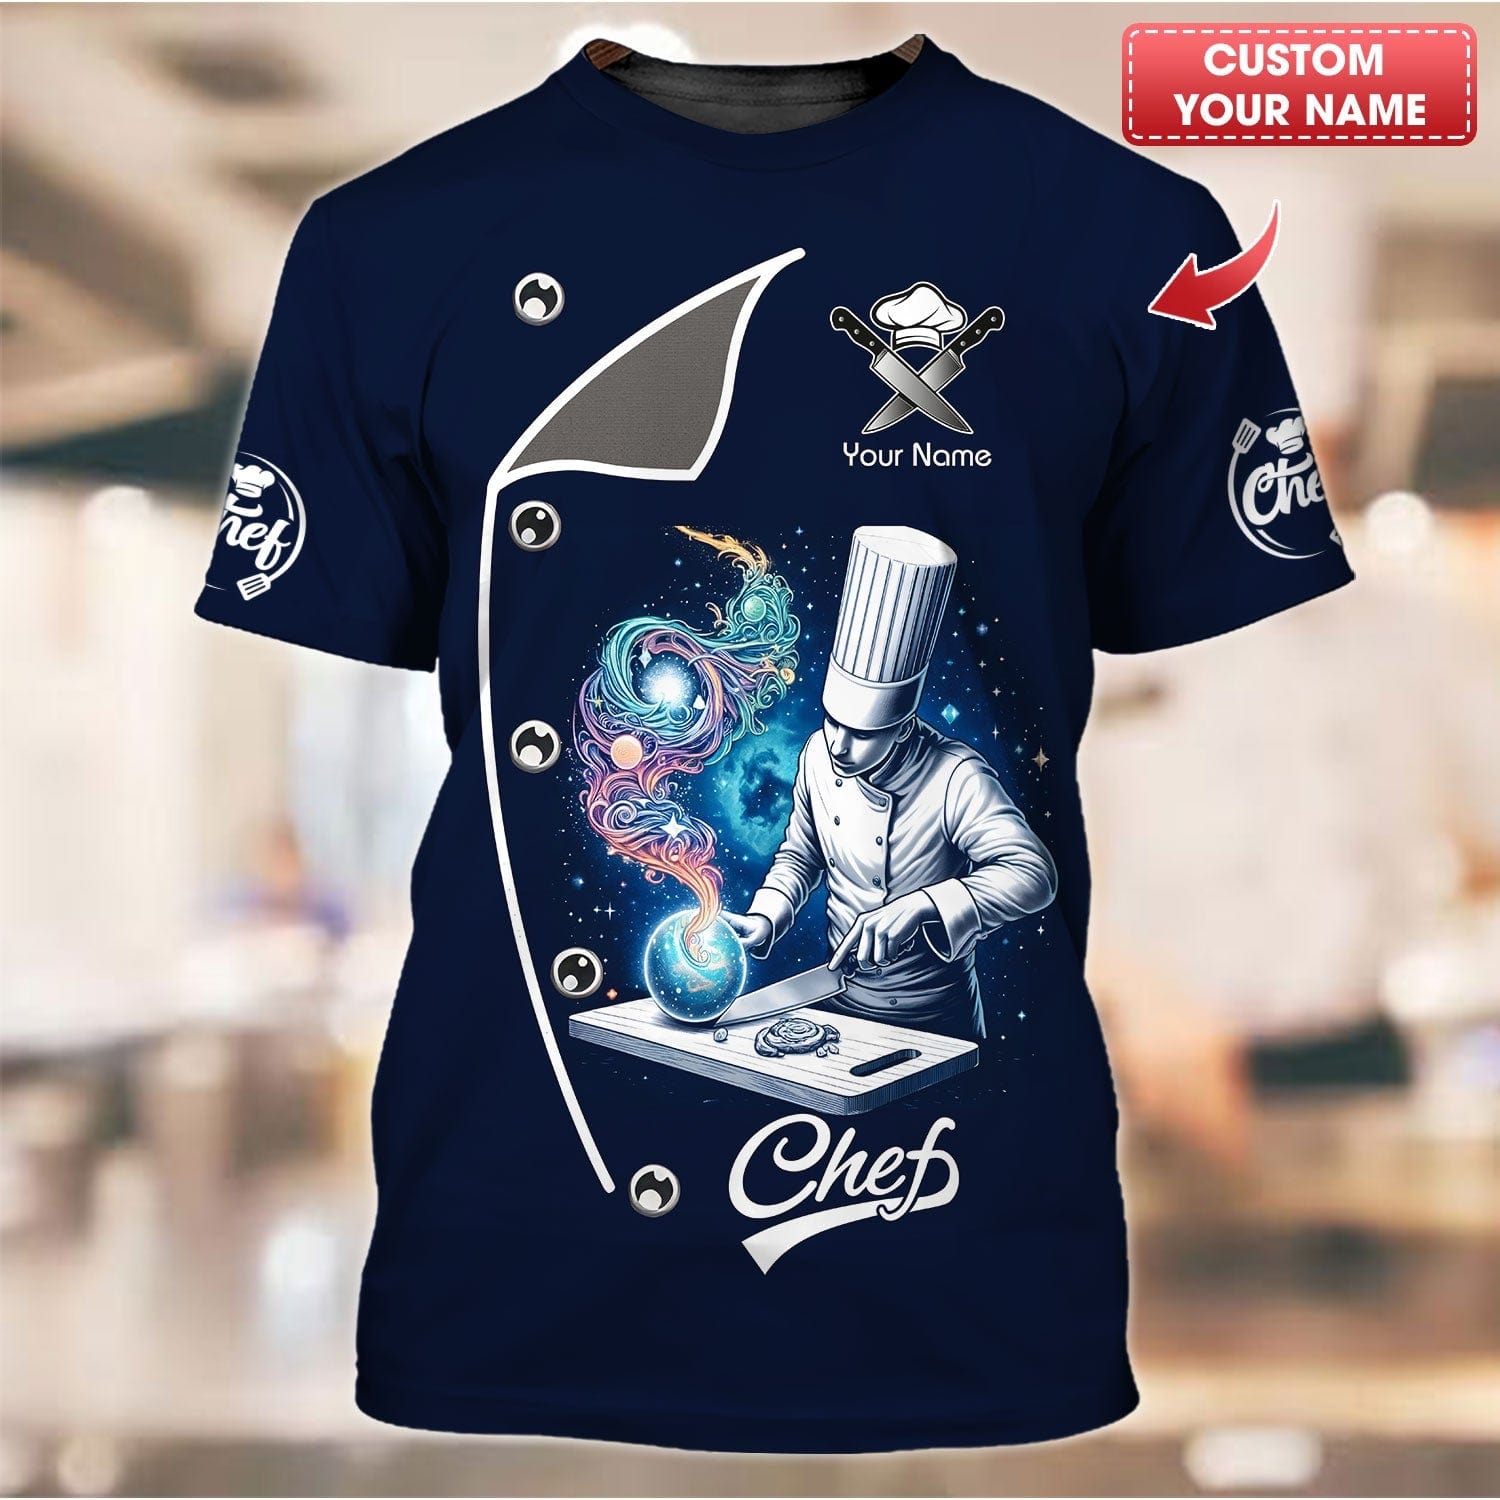 Personalized Chef Shirt - Galactic Culinary Art and Enchanted Tastes